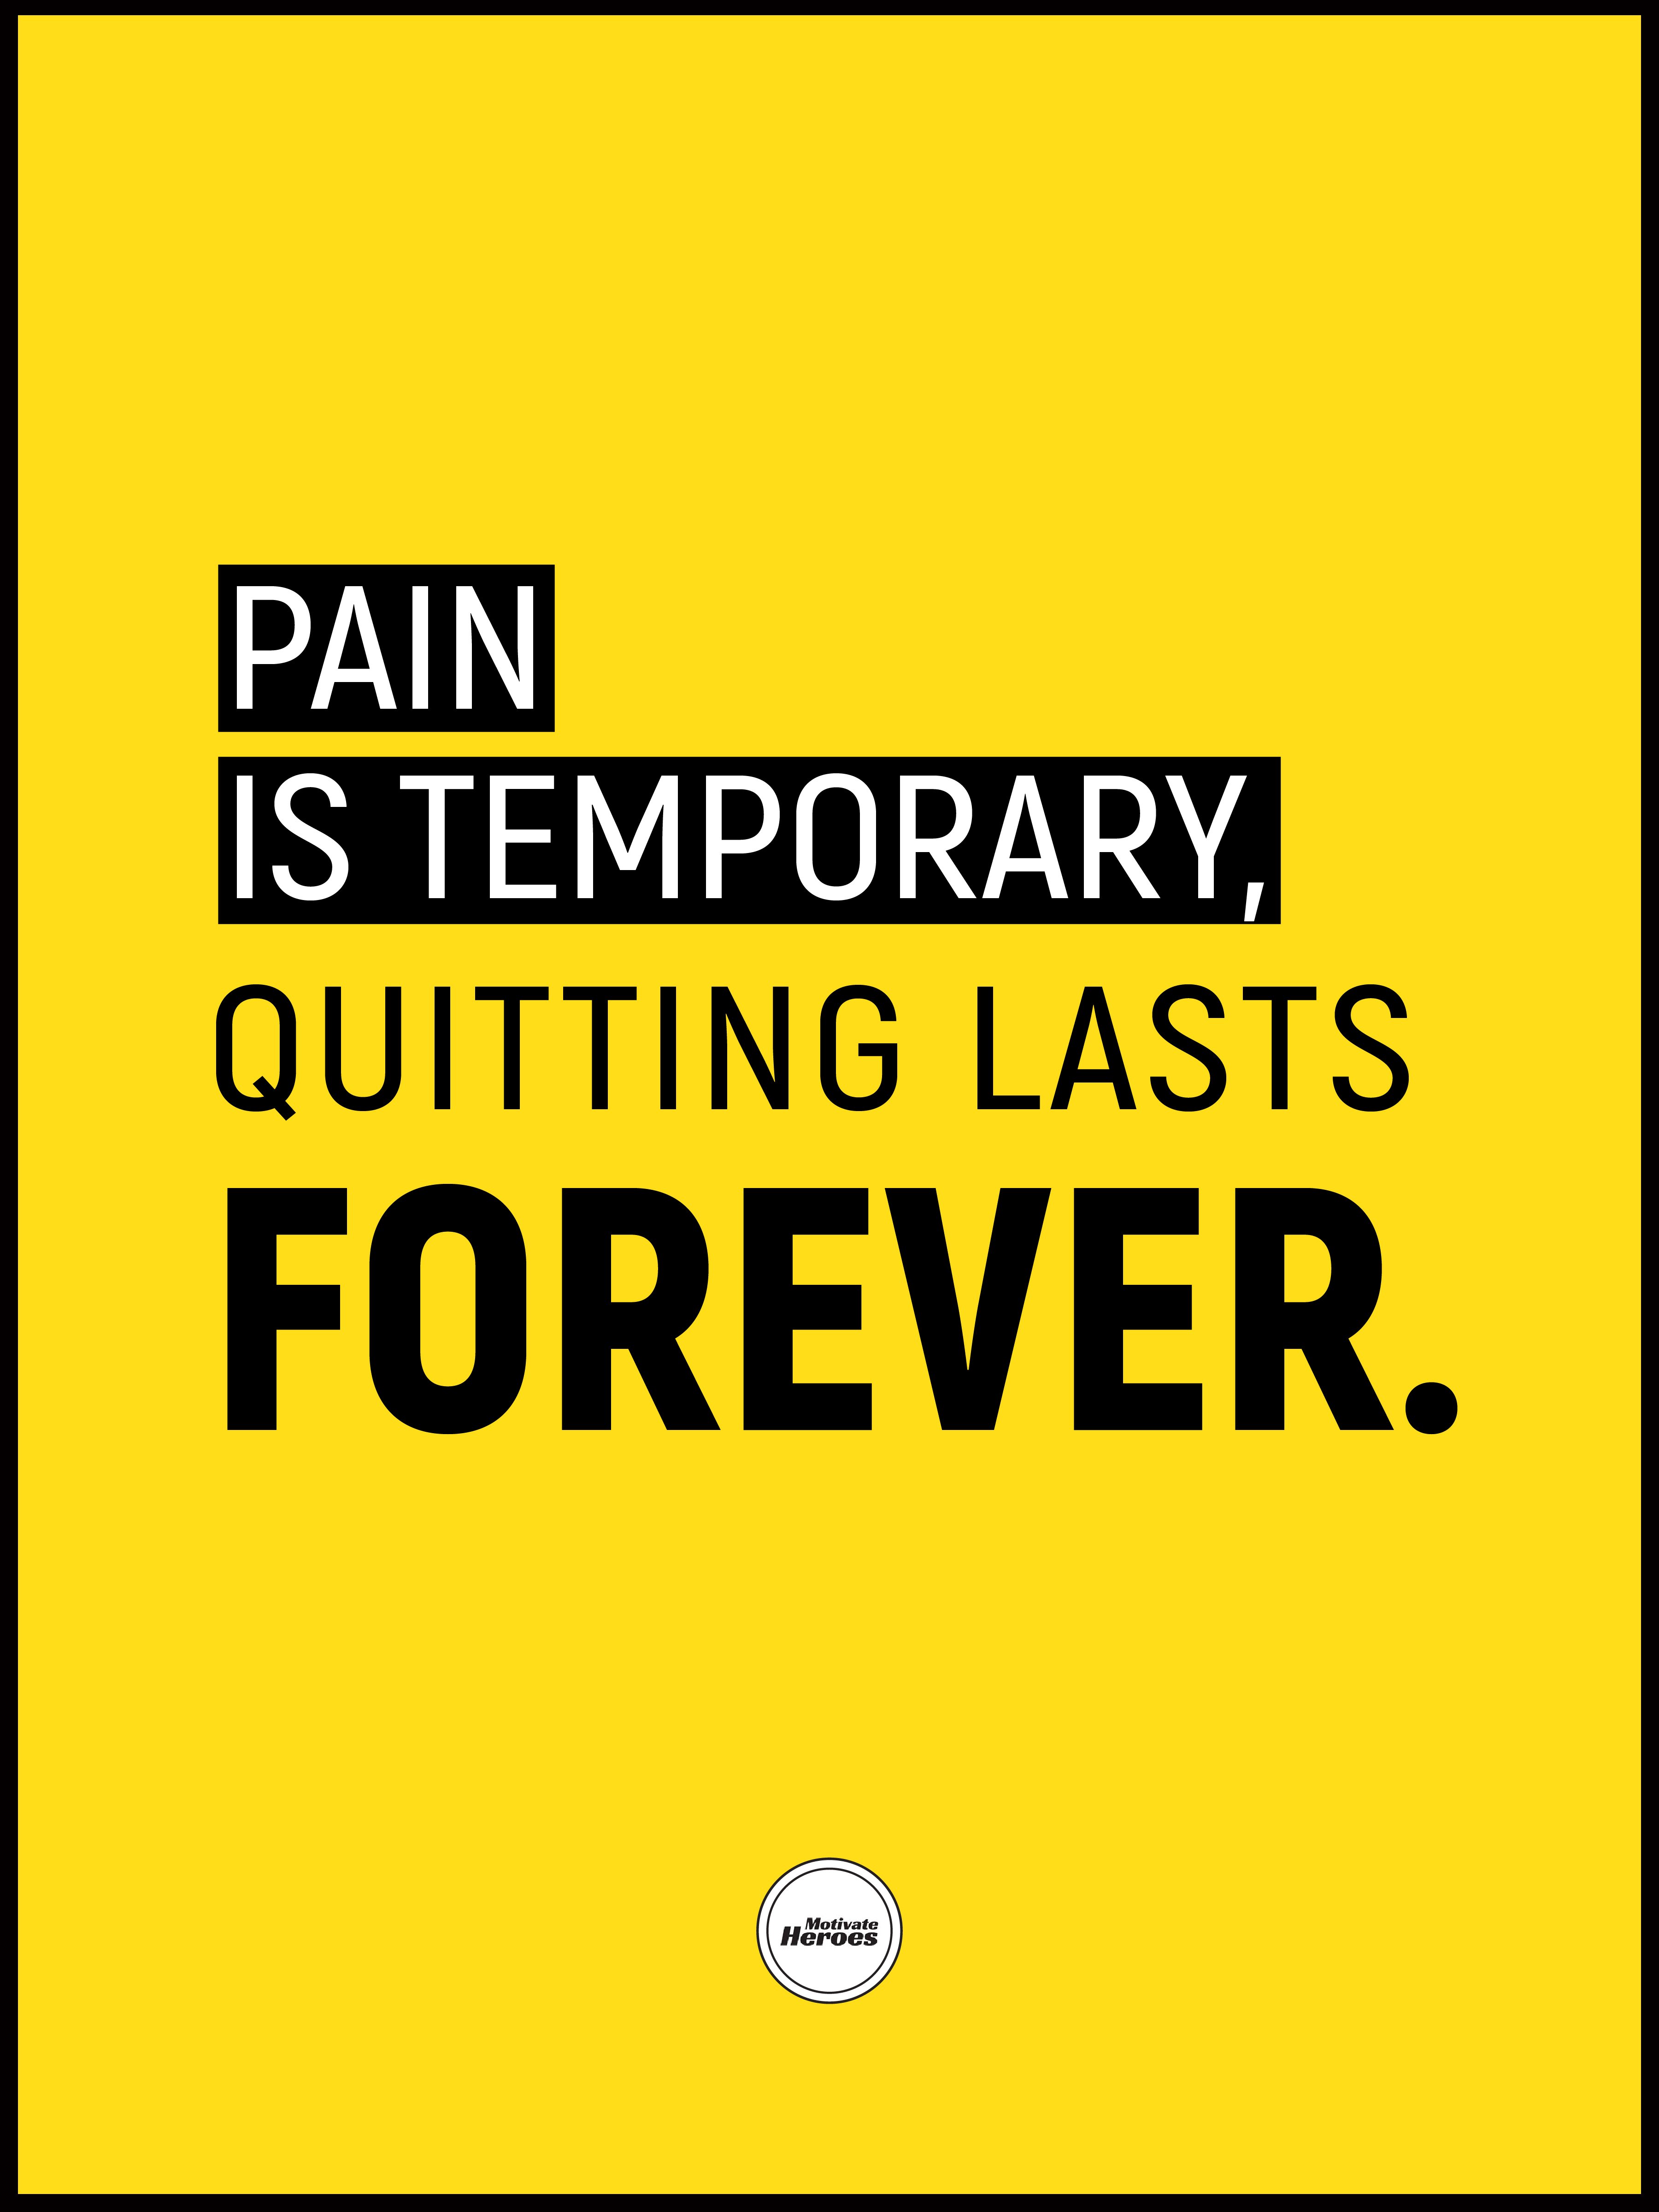 Pain Is Temporary Quitting Lasts Forever Buy Motivational Posters Motivate Heroes